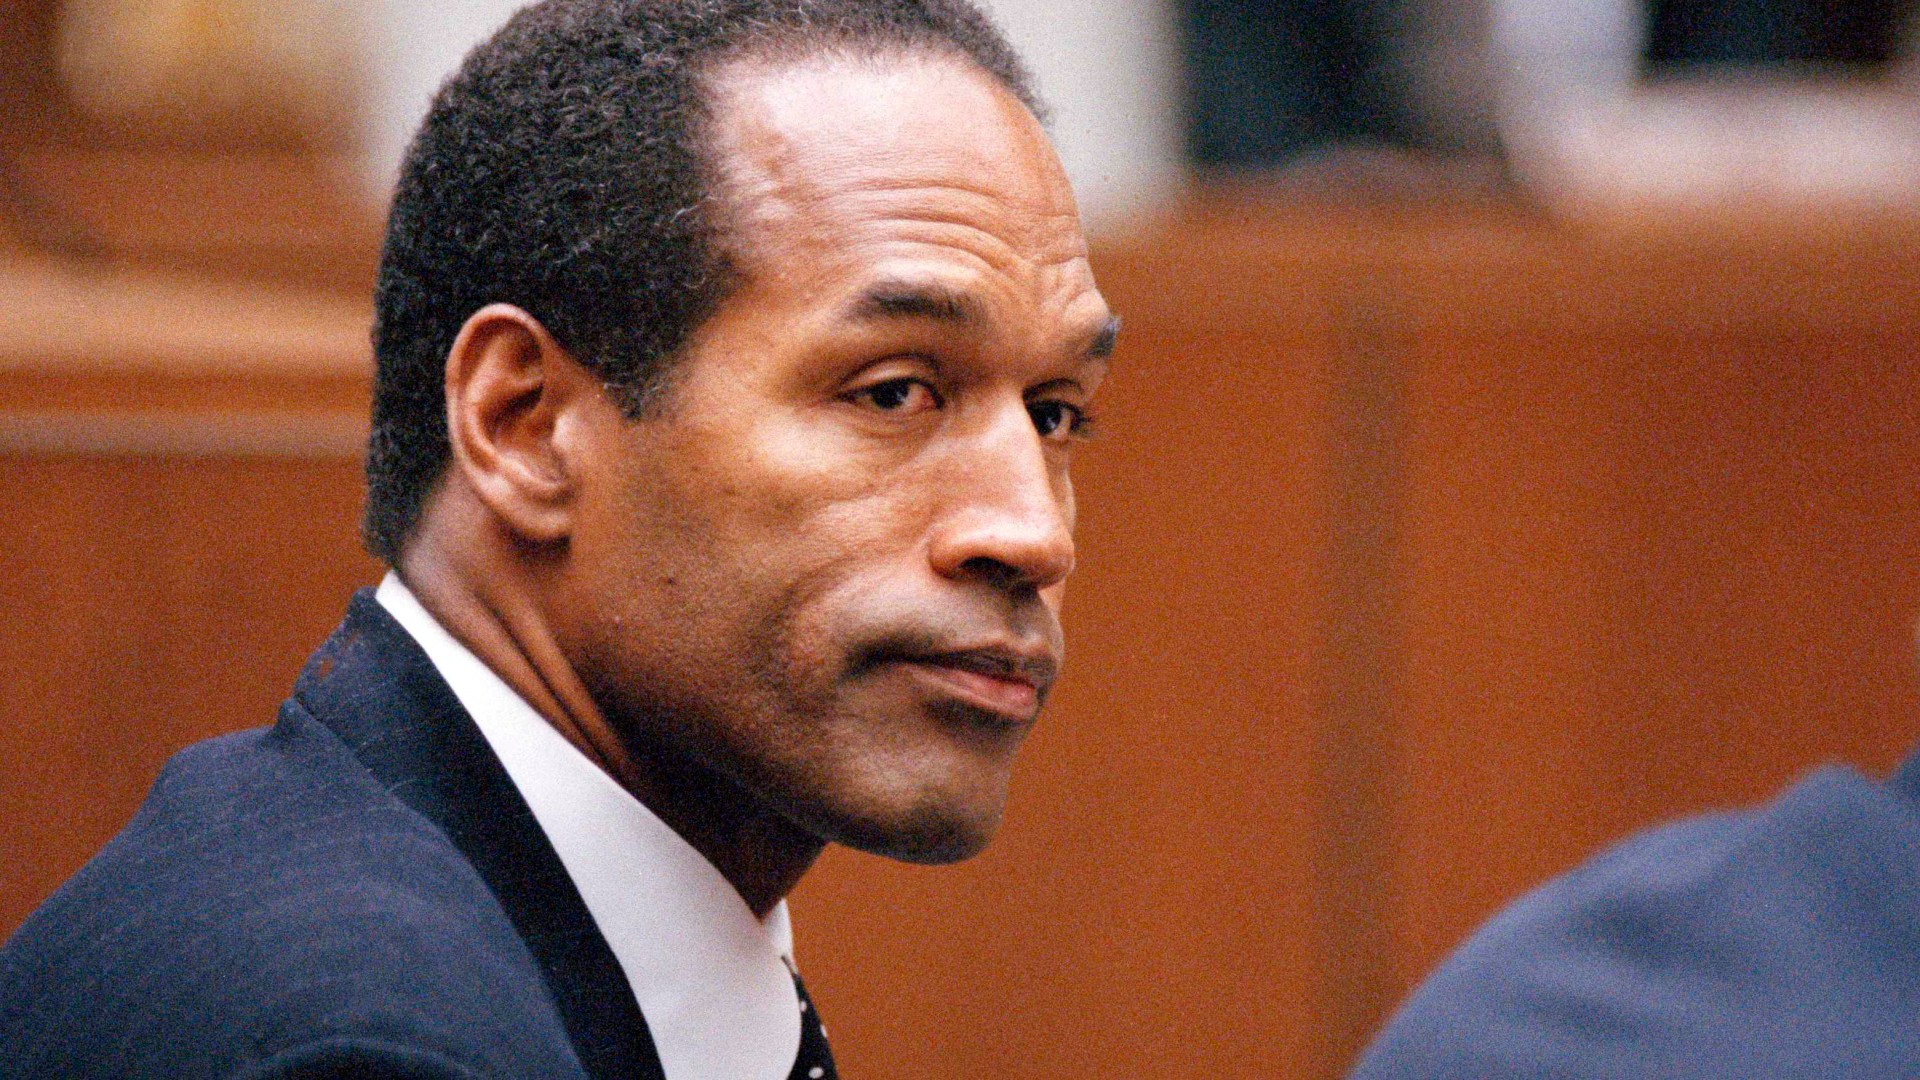 “Exclusive: OJ Simpson’s Quiet Cremation in Las Vegas Revealed After Tragic Cancer Death at 76” – SEO optimized headline